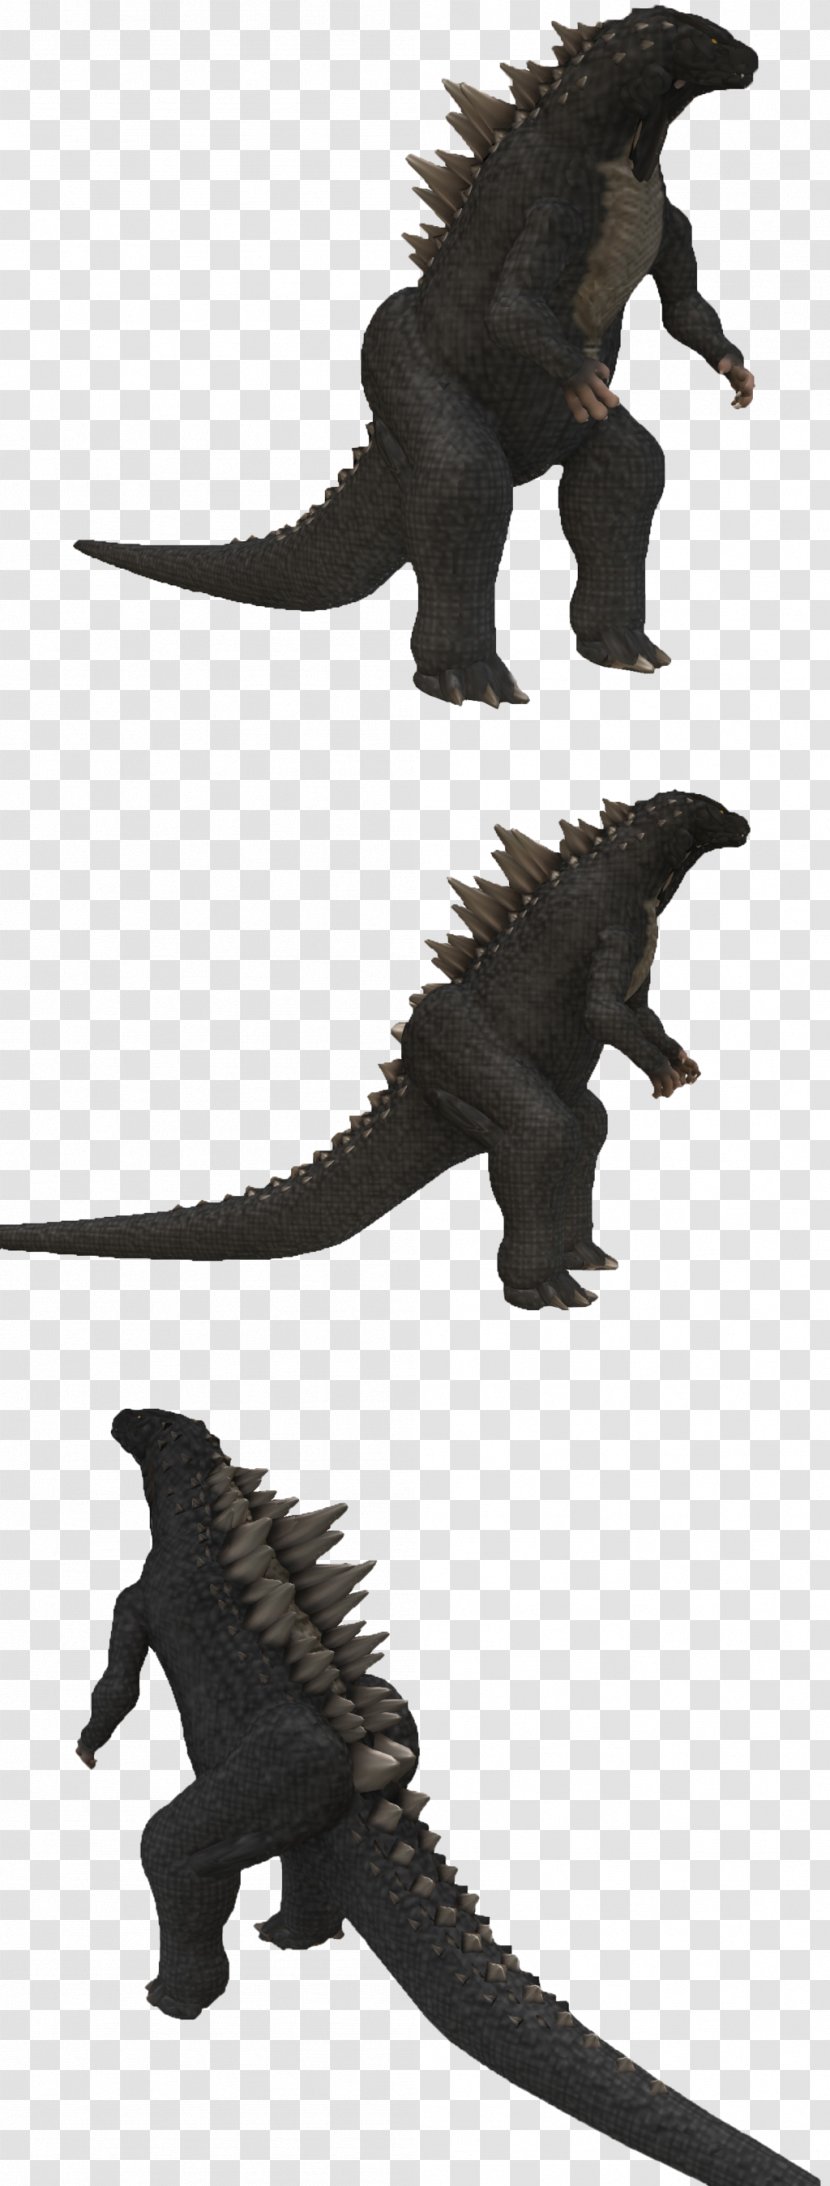 Spore: Galactic Adventures Godzilla: Monster Of Monsters Spore Creature Creator DeviantArt - Godzilla Transparent PNG